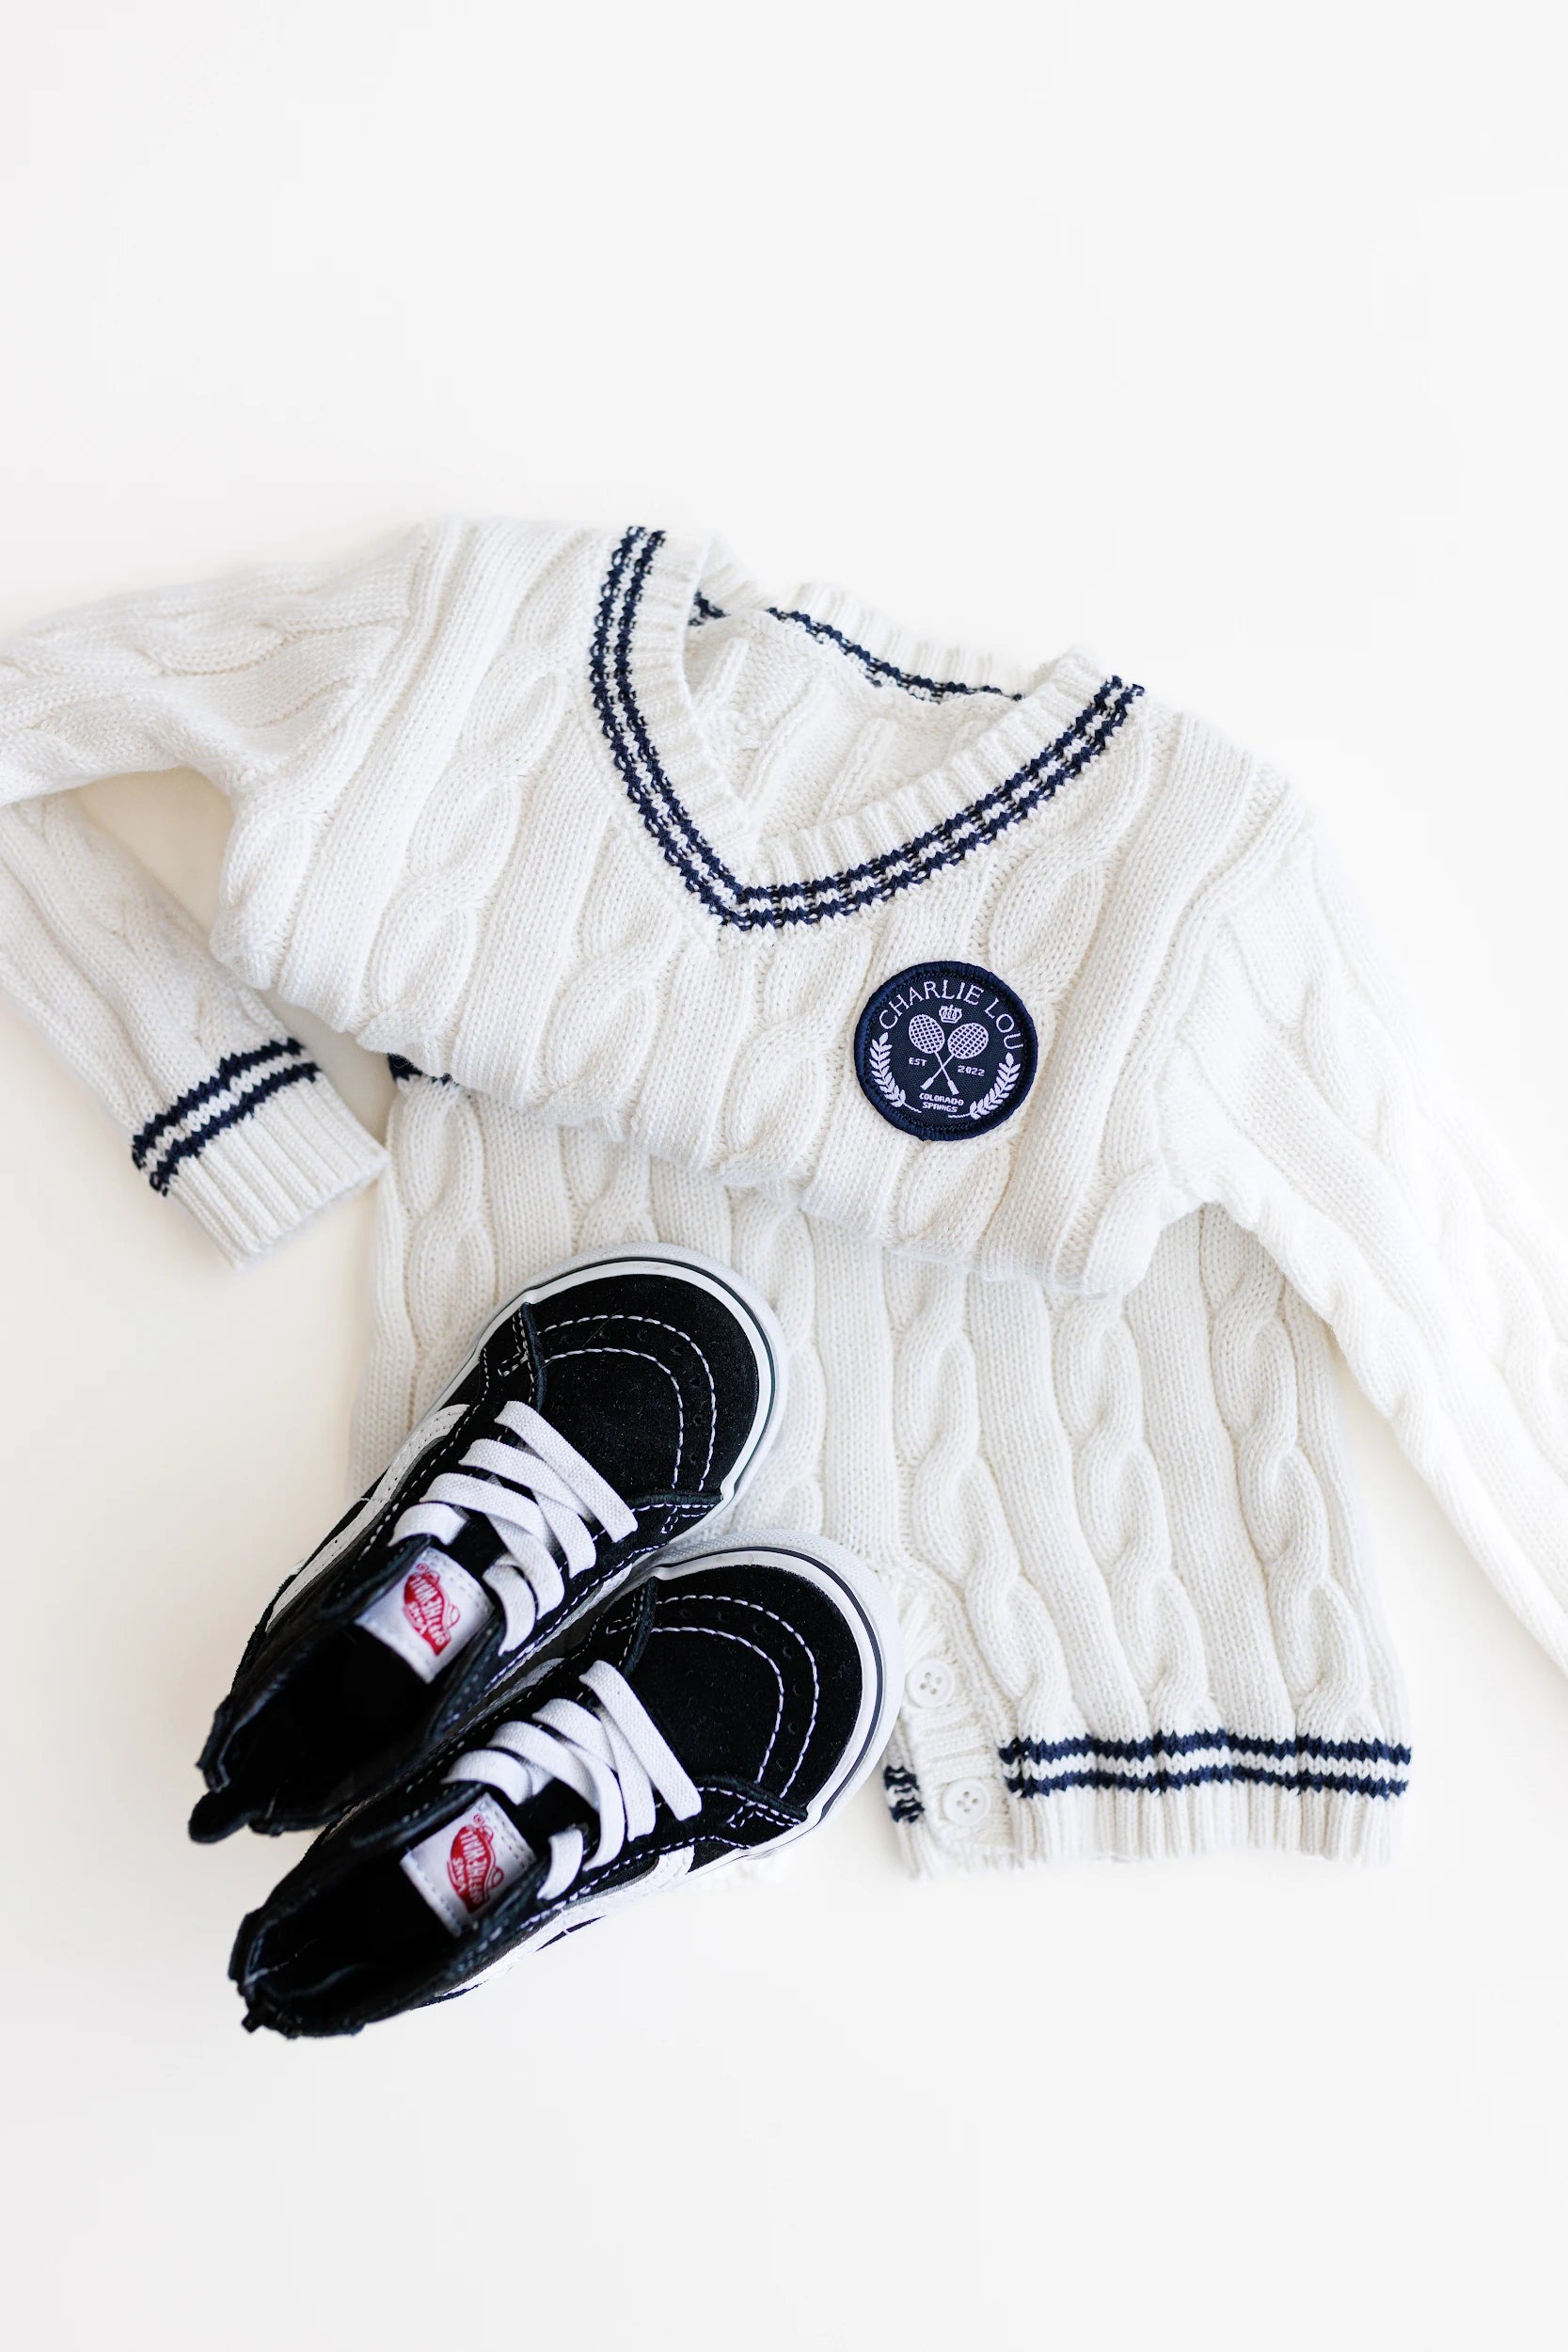 Gender neutral varsity sweater romper in cream and navy blue colors made from chain knit cotton for baby boys and baby girls as well as toddlers.